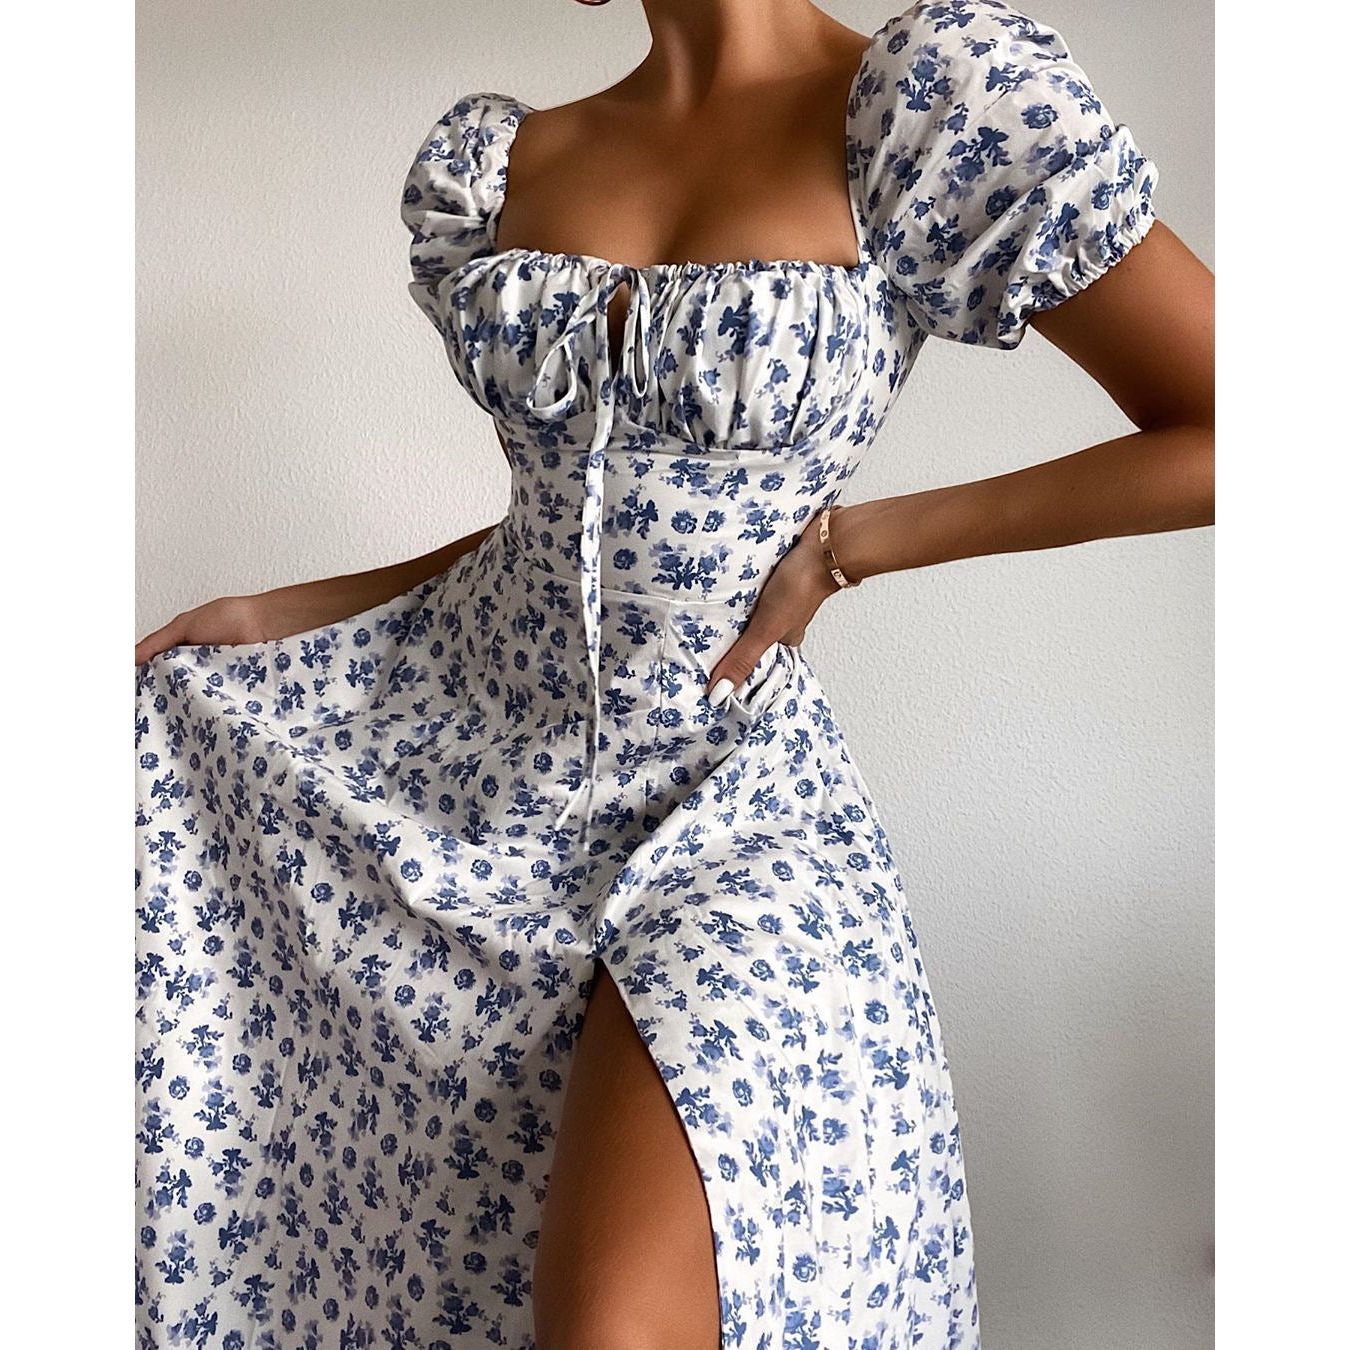 Yissang Floral Print Puff Short Sleeve Women Dress High Split Party Long Dresses Elegant Lace Up - Jointcorp